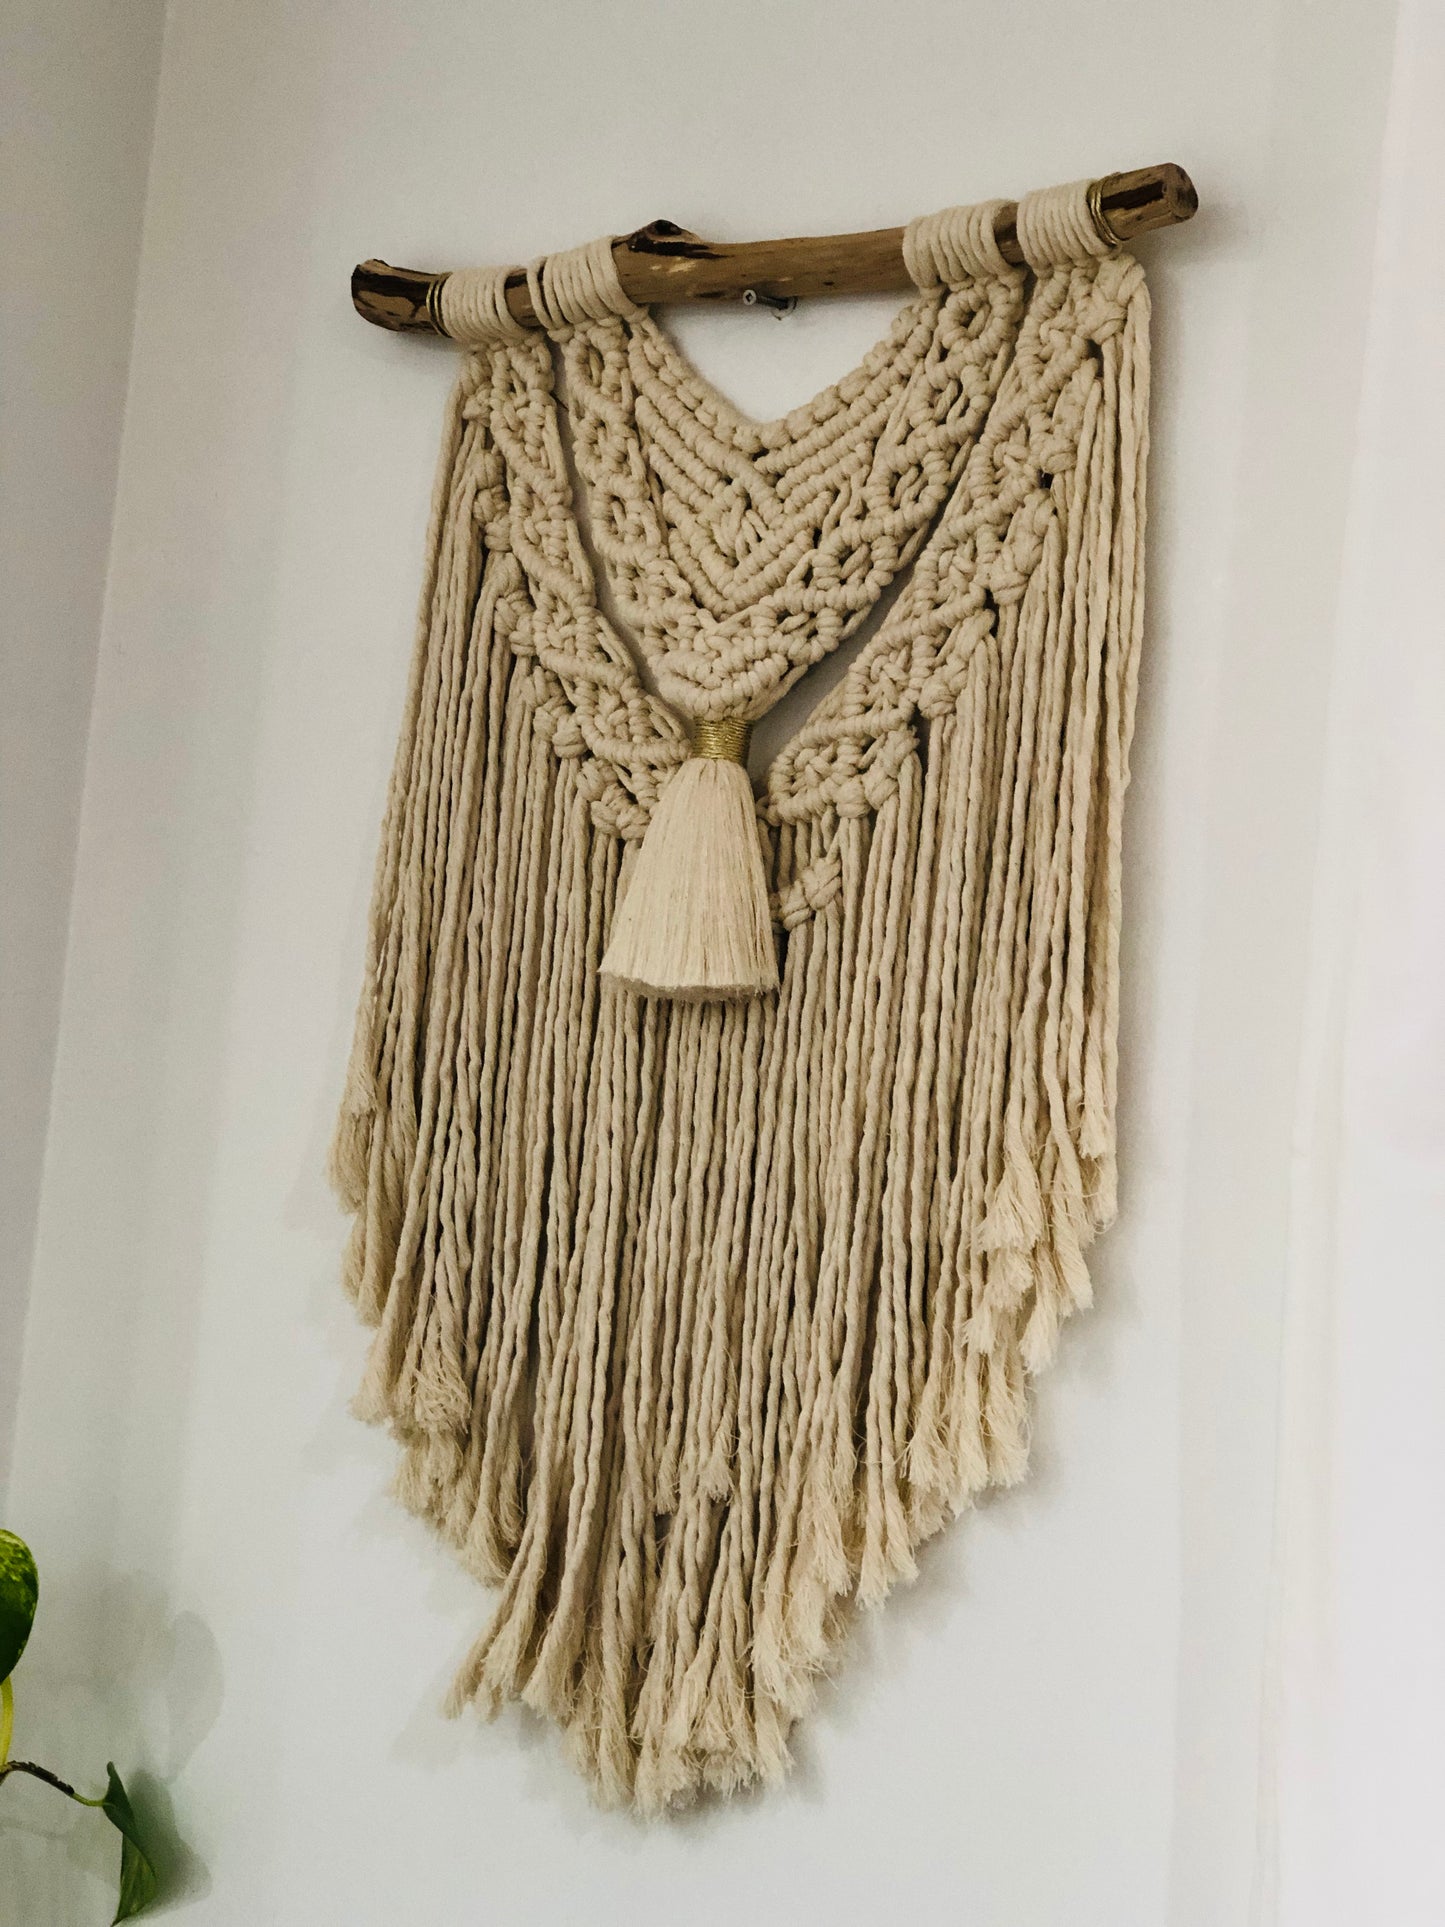 Macrame Wall Hanging - Knotted by Hand